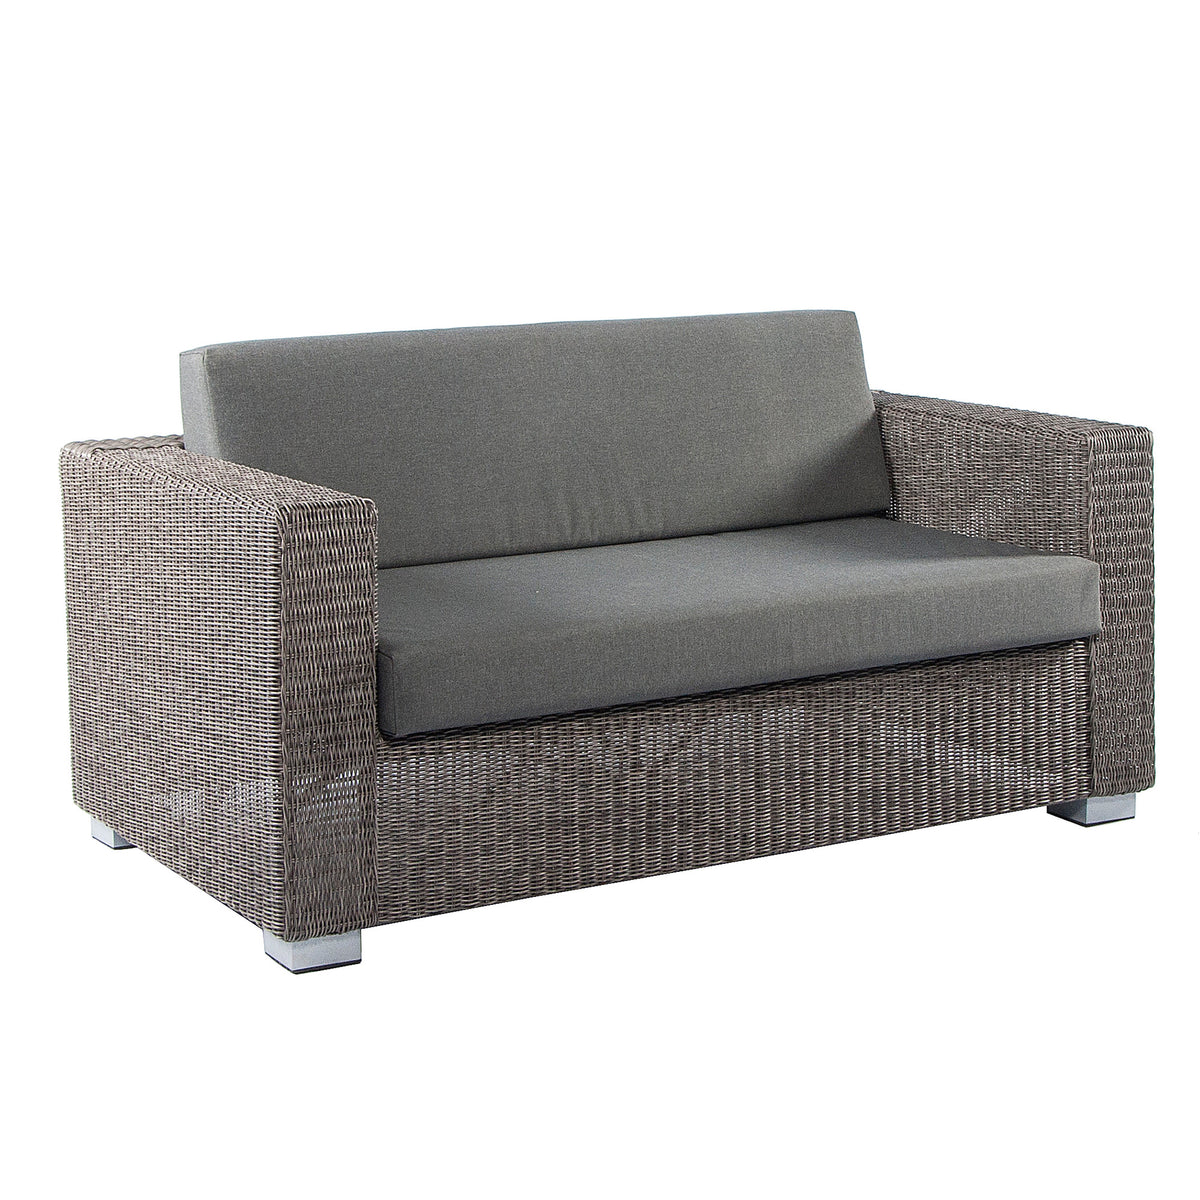 Alexander Rose Monte Carlo Grand 2 Seater Sofa With Charcoal Cushions